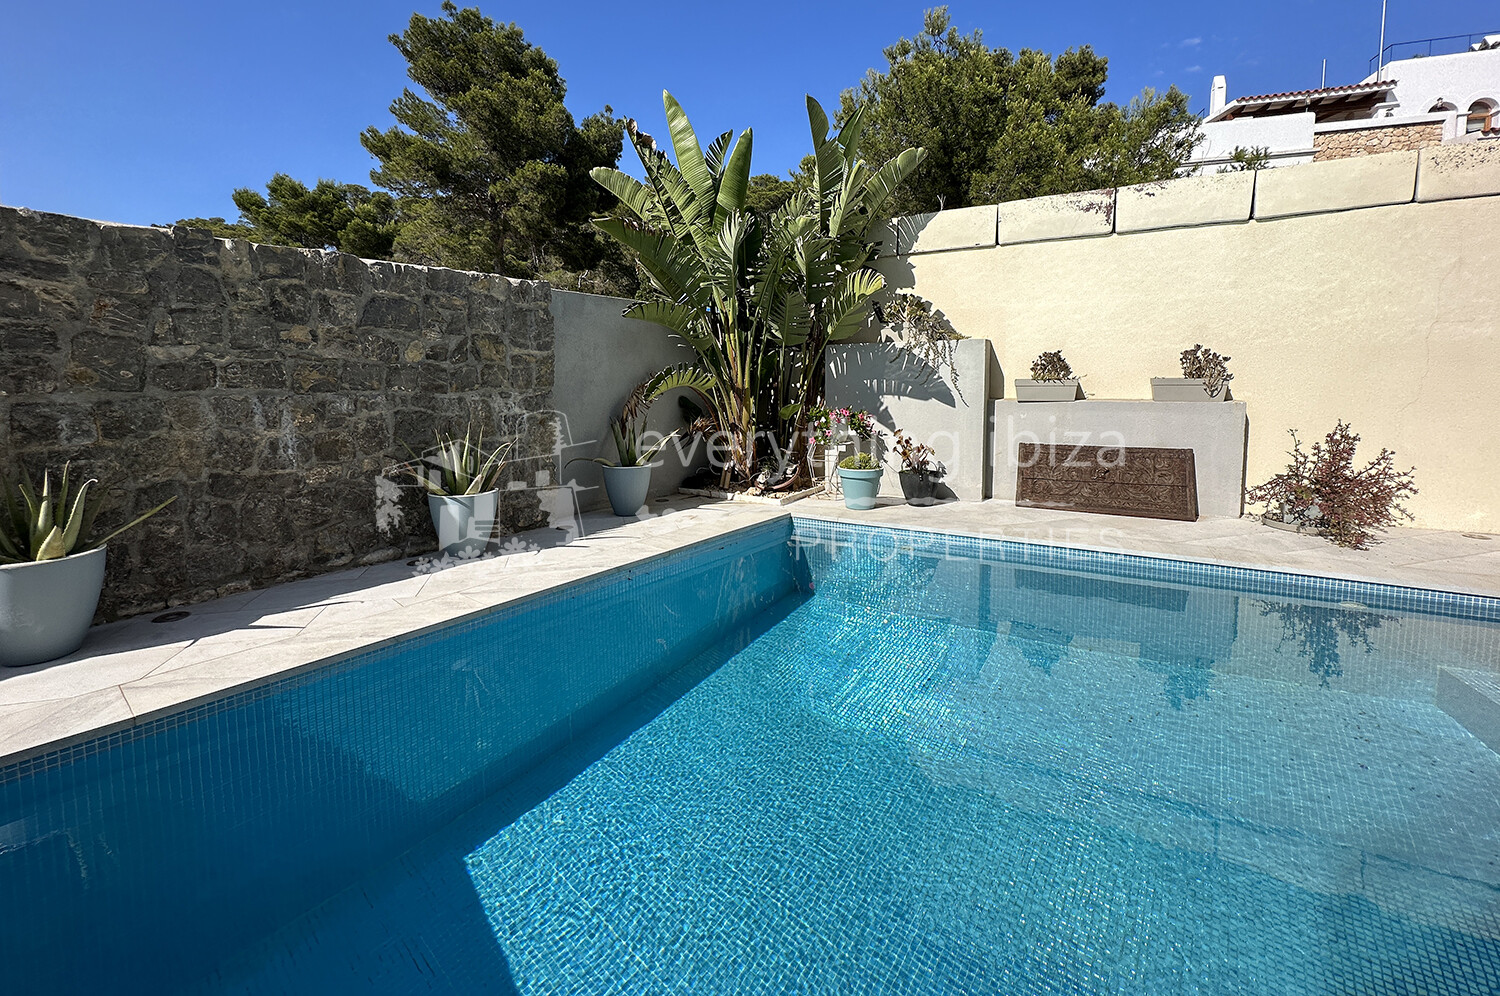 Magnificent Villa of Quality with Super Views, ref. 1365, for sale in Ibiza by everything ibiza Properties